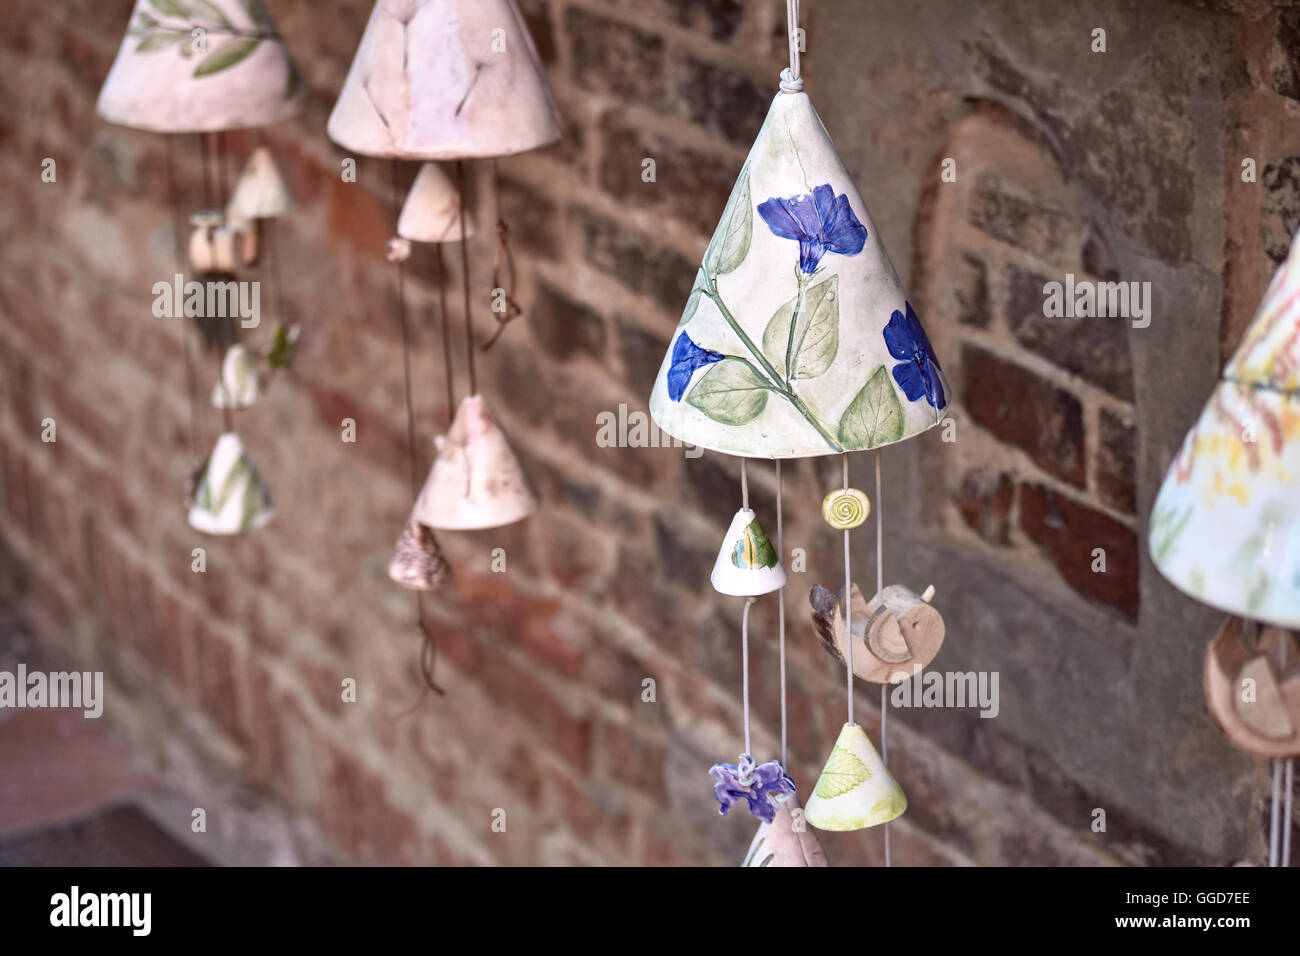 a particular skill of making decorative objects by hand,made in Italy Stock Photo